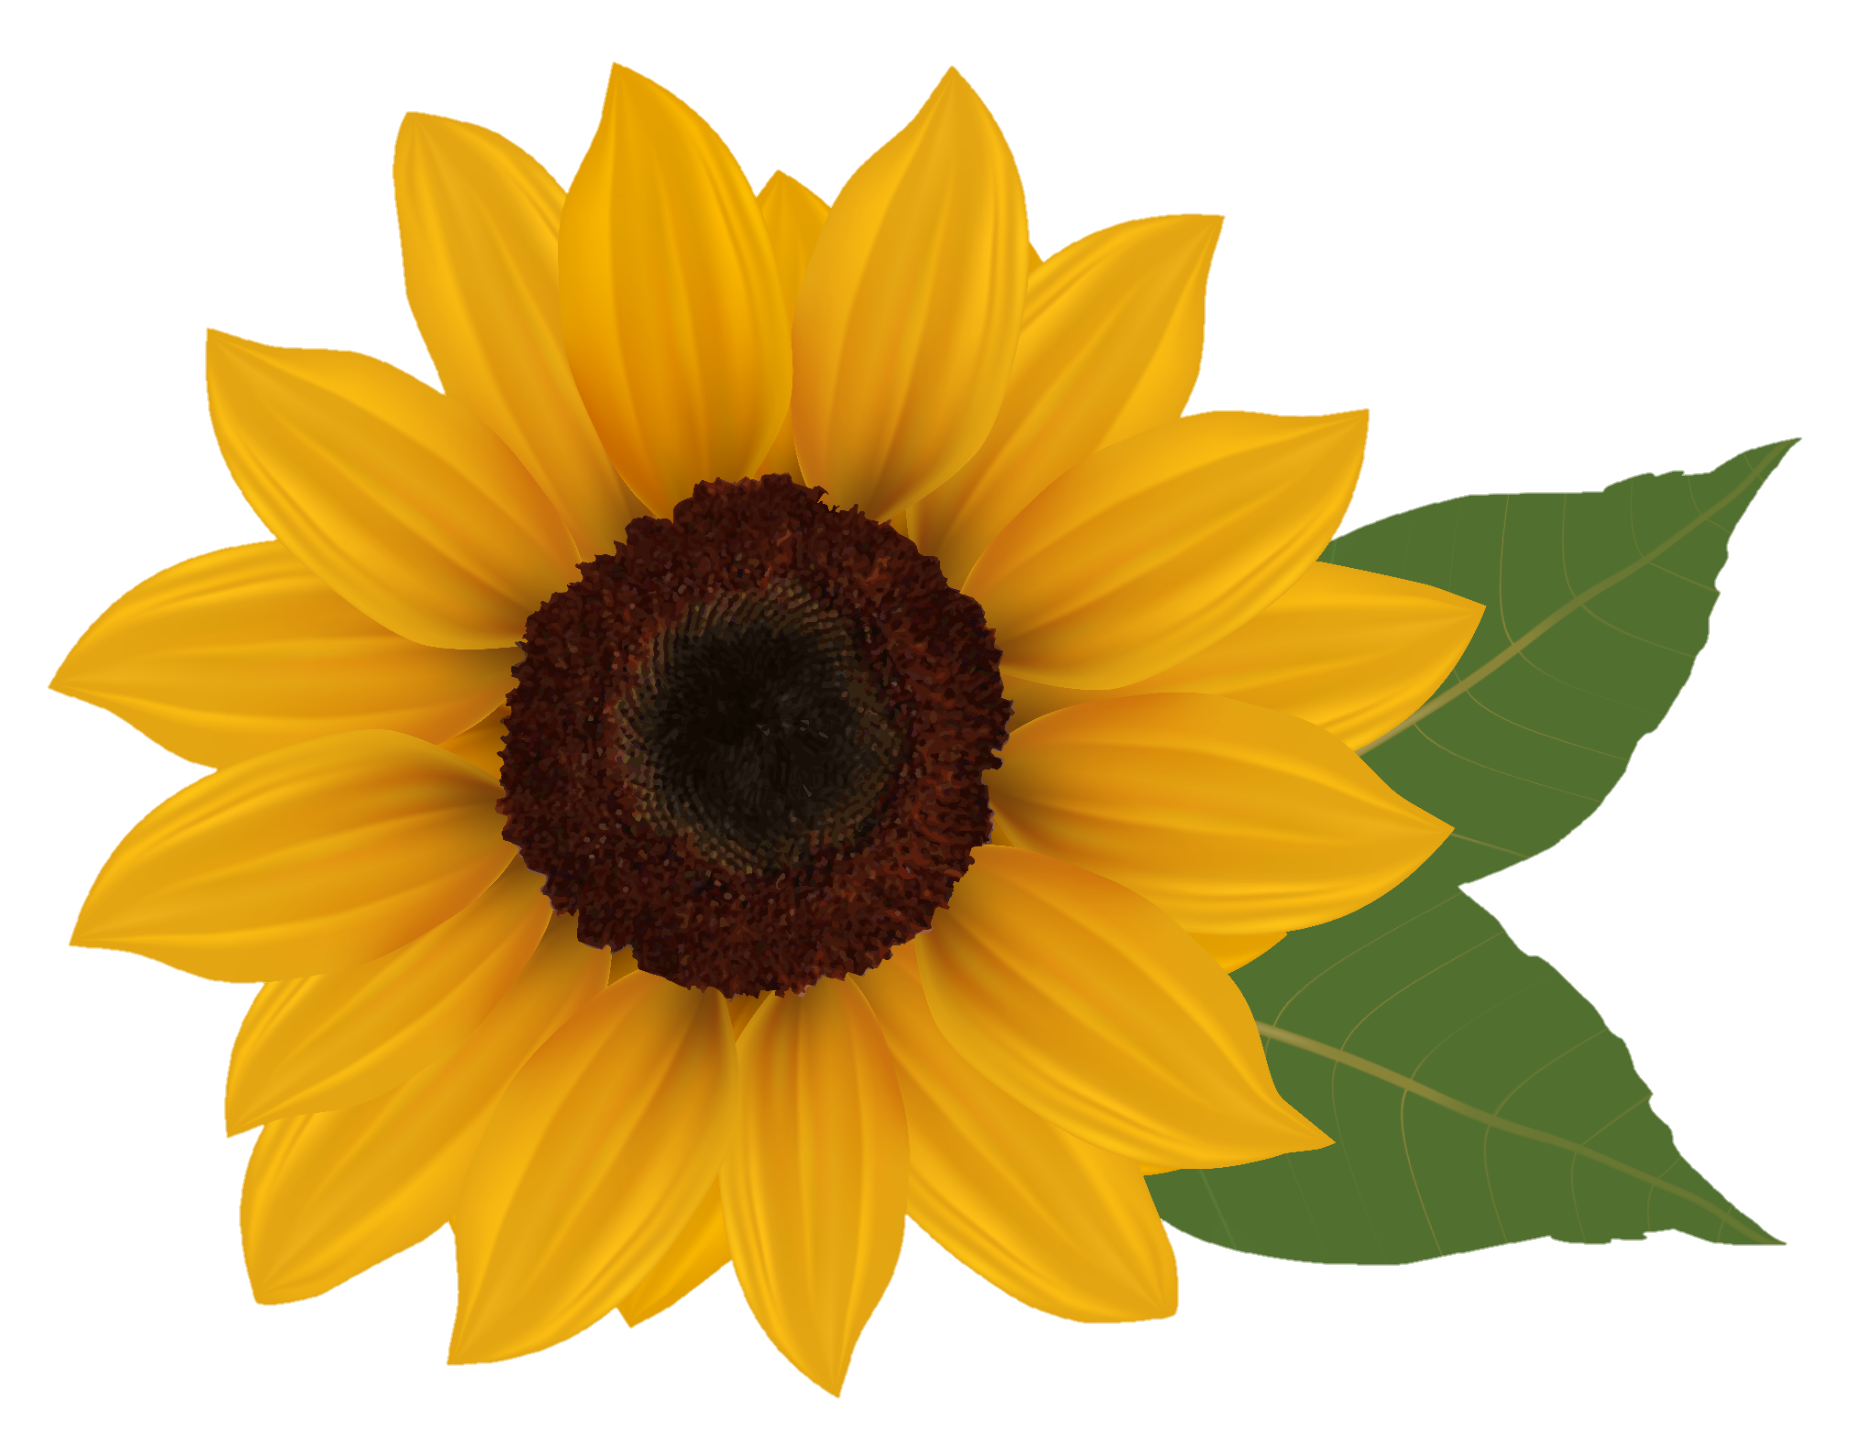 sunflower-png-image-from-pngfre-5